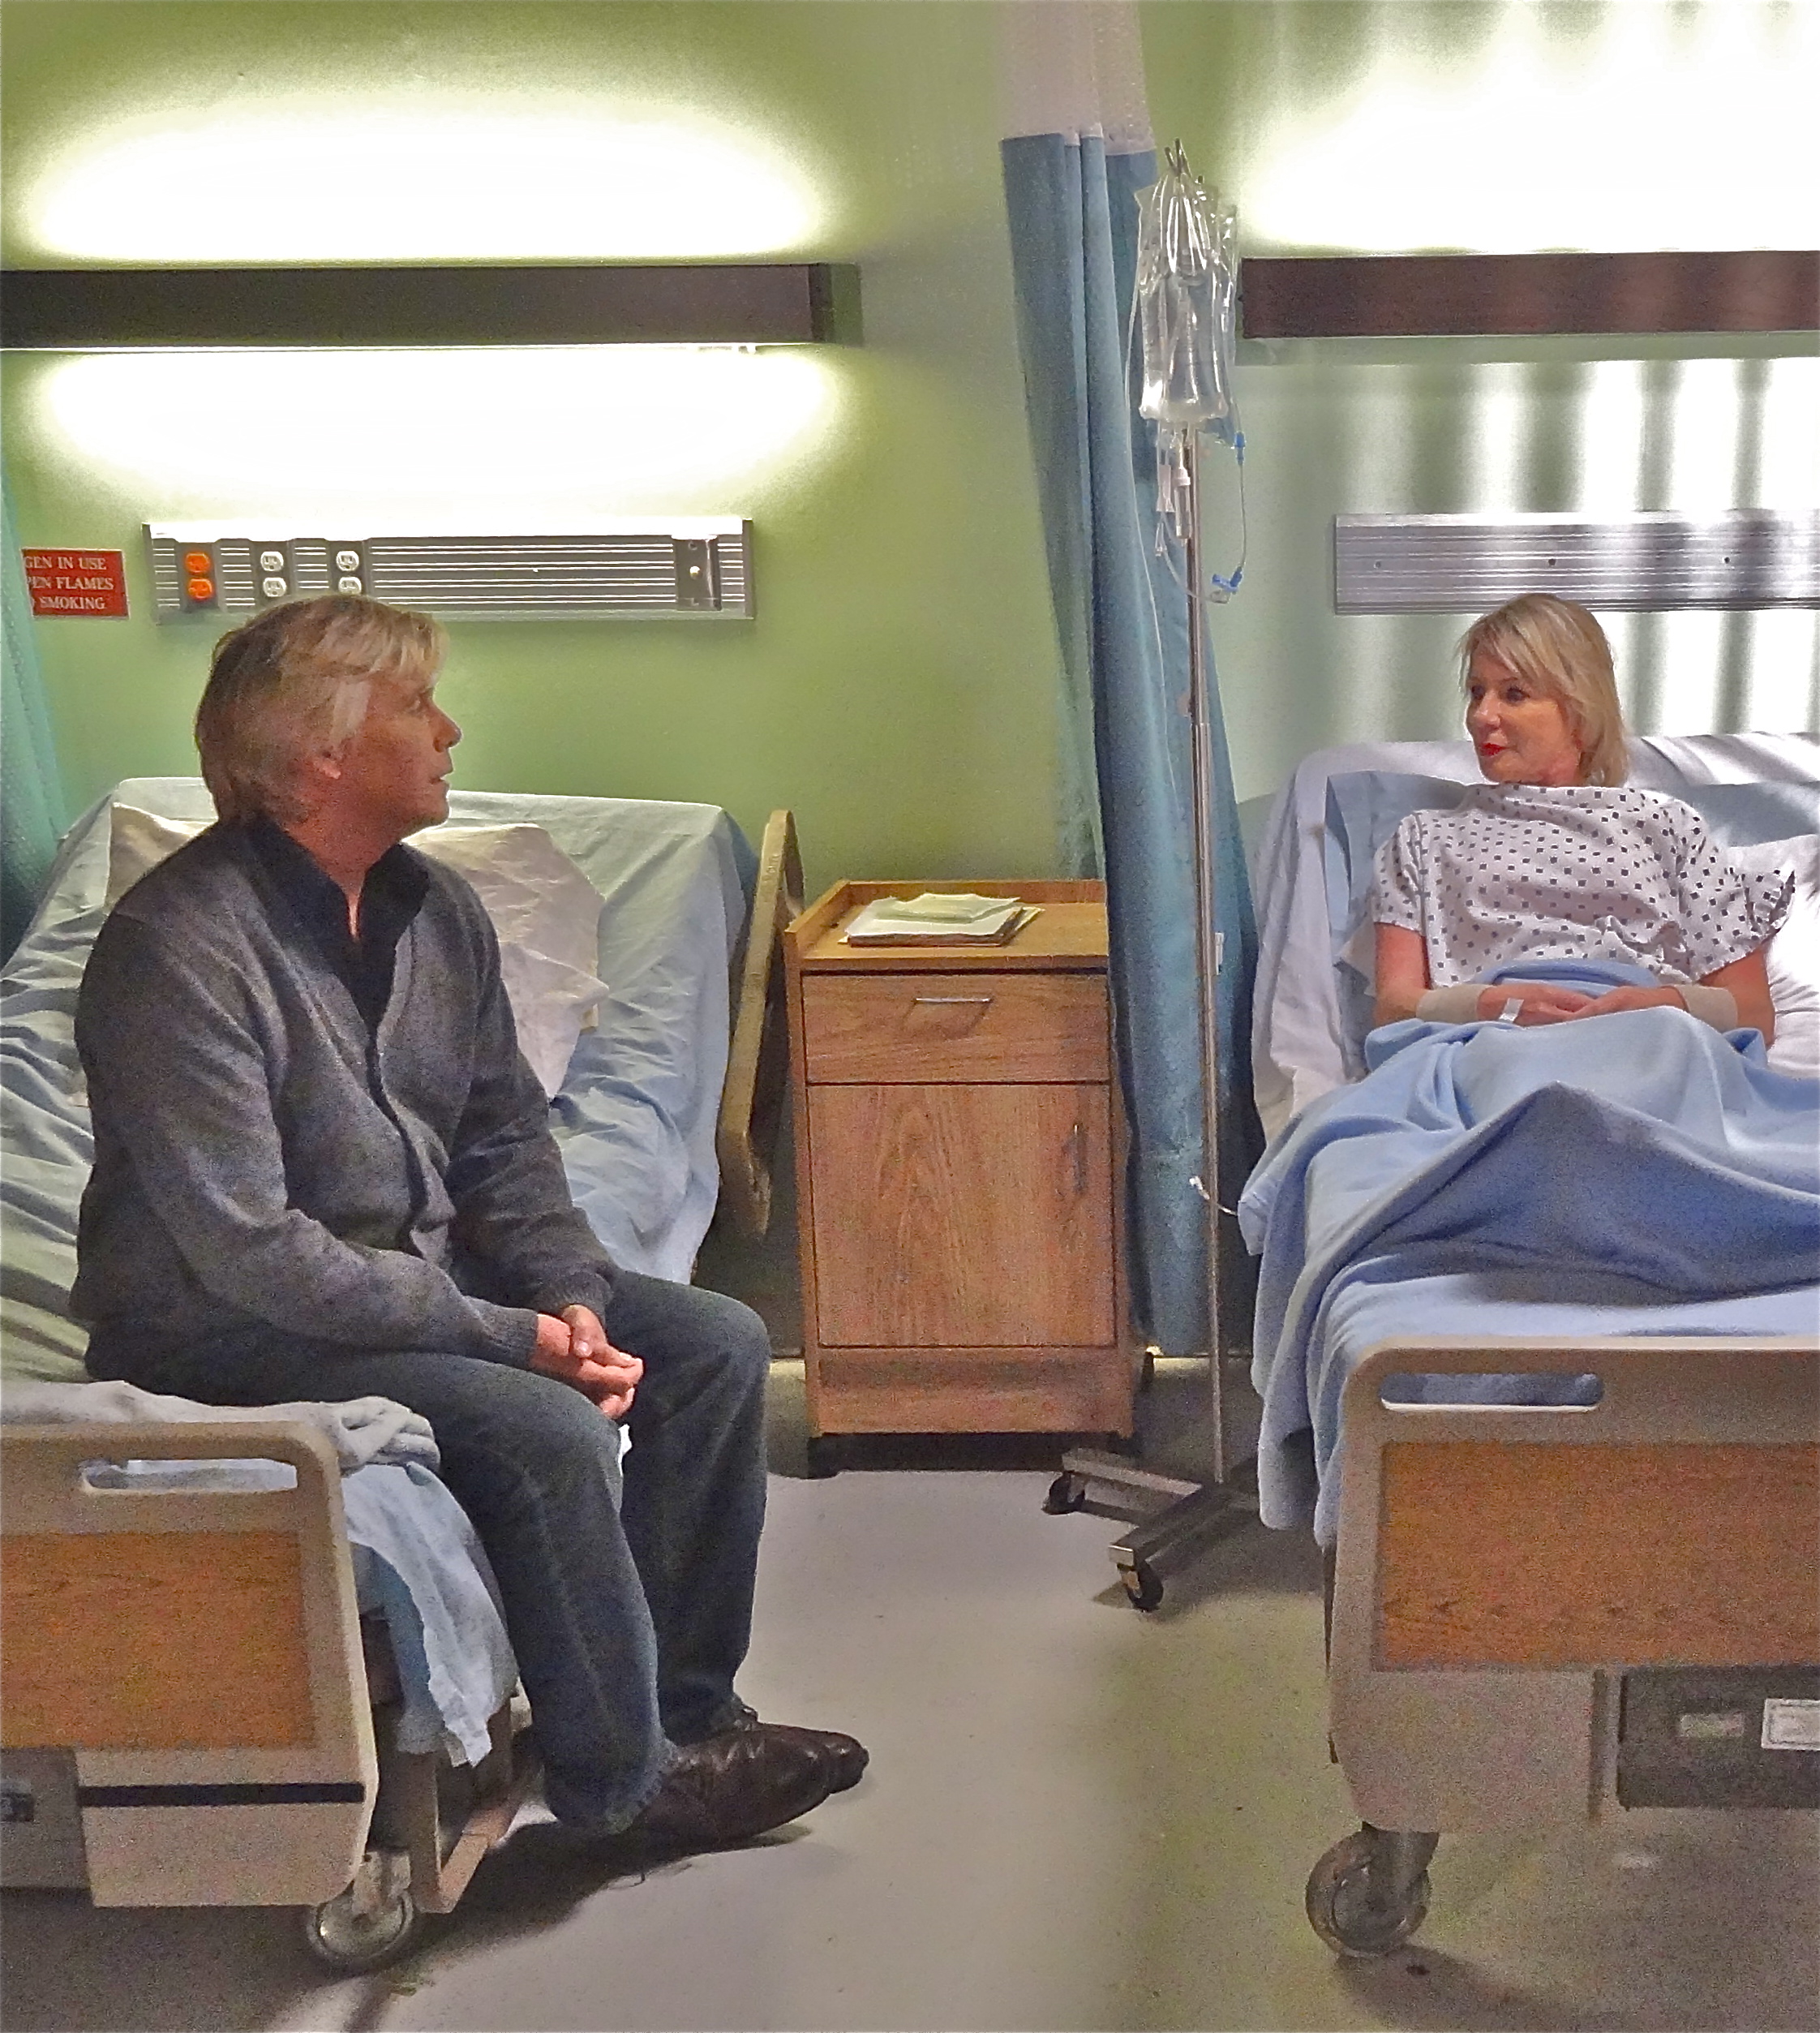 Henry (Christopher Atkins) visiting his wife, Ellen (Kandra King) in the hospital during the filming of the feature film, Lake of Fire, 2014.